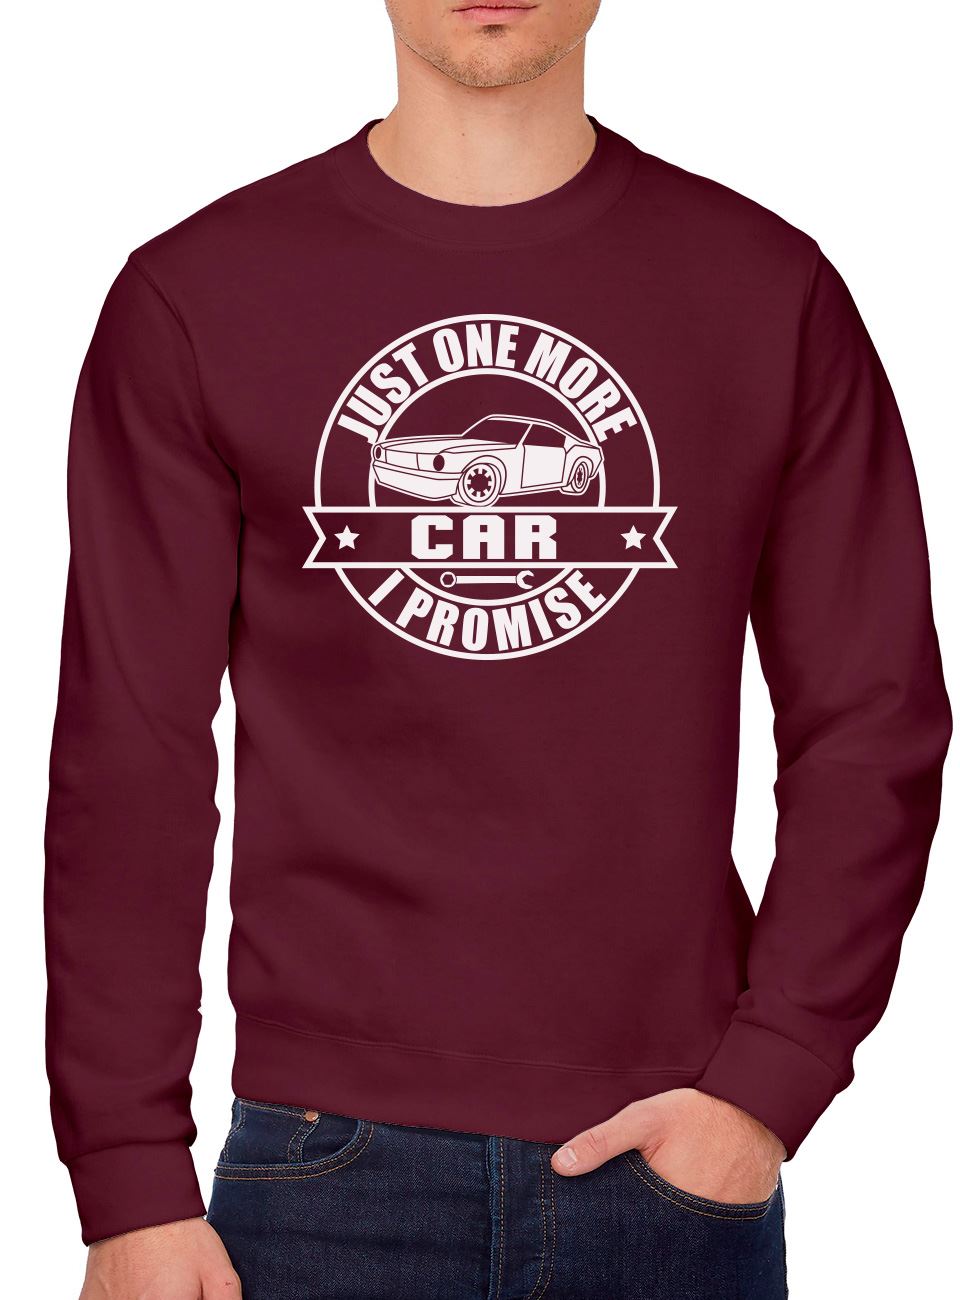 Just One More Car I Promise - Youth & Mens Sweatshirt